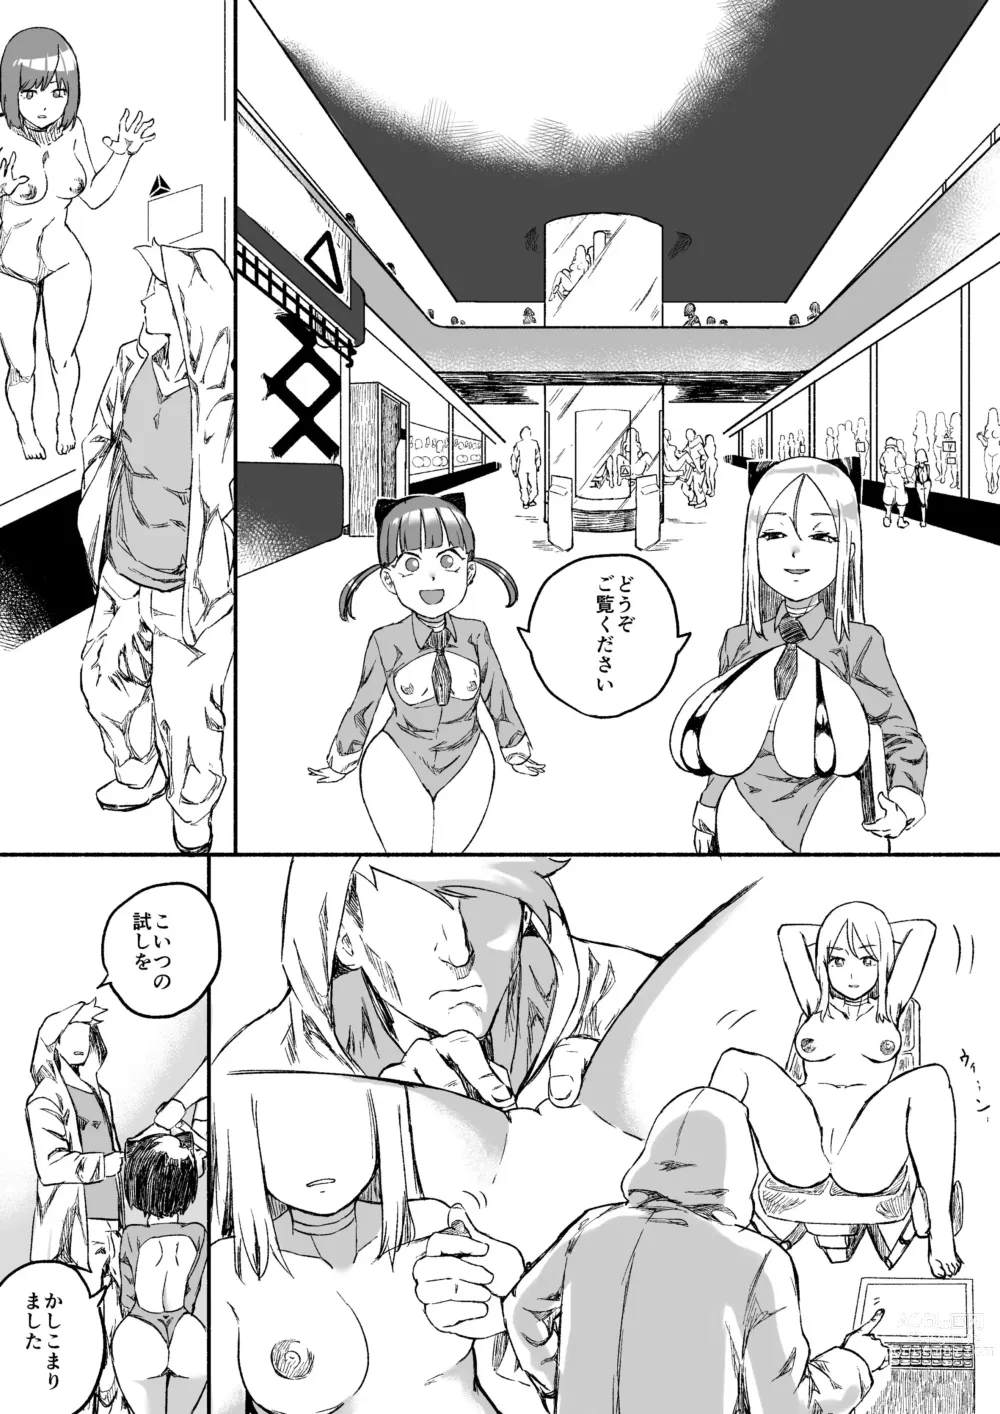 Page 9 of doujinshi Red Tag Episode 8